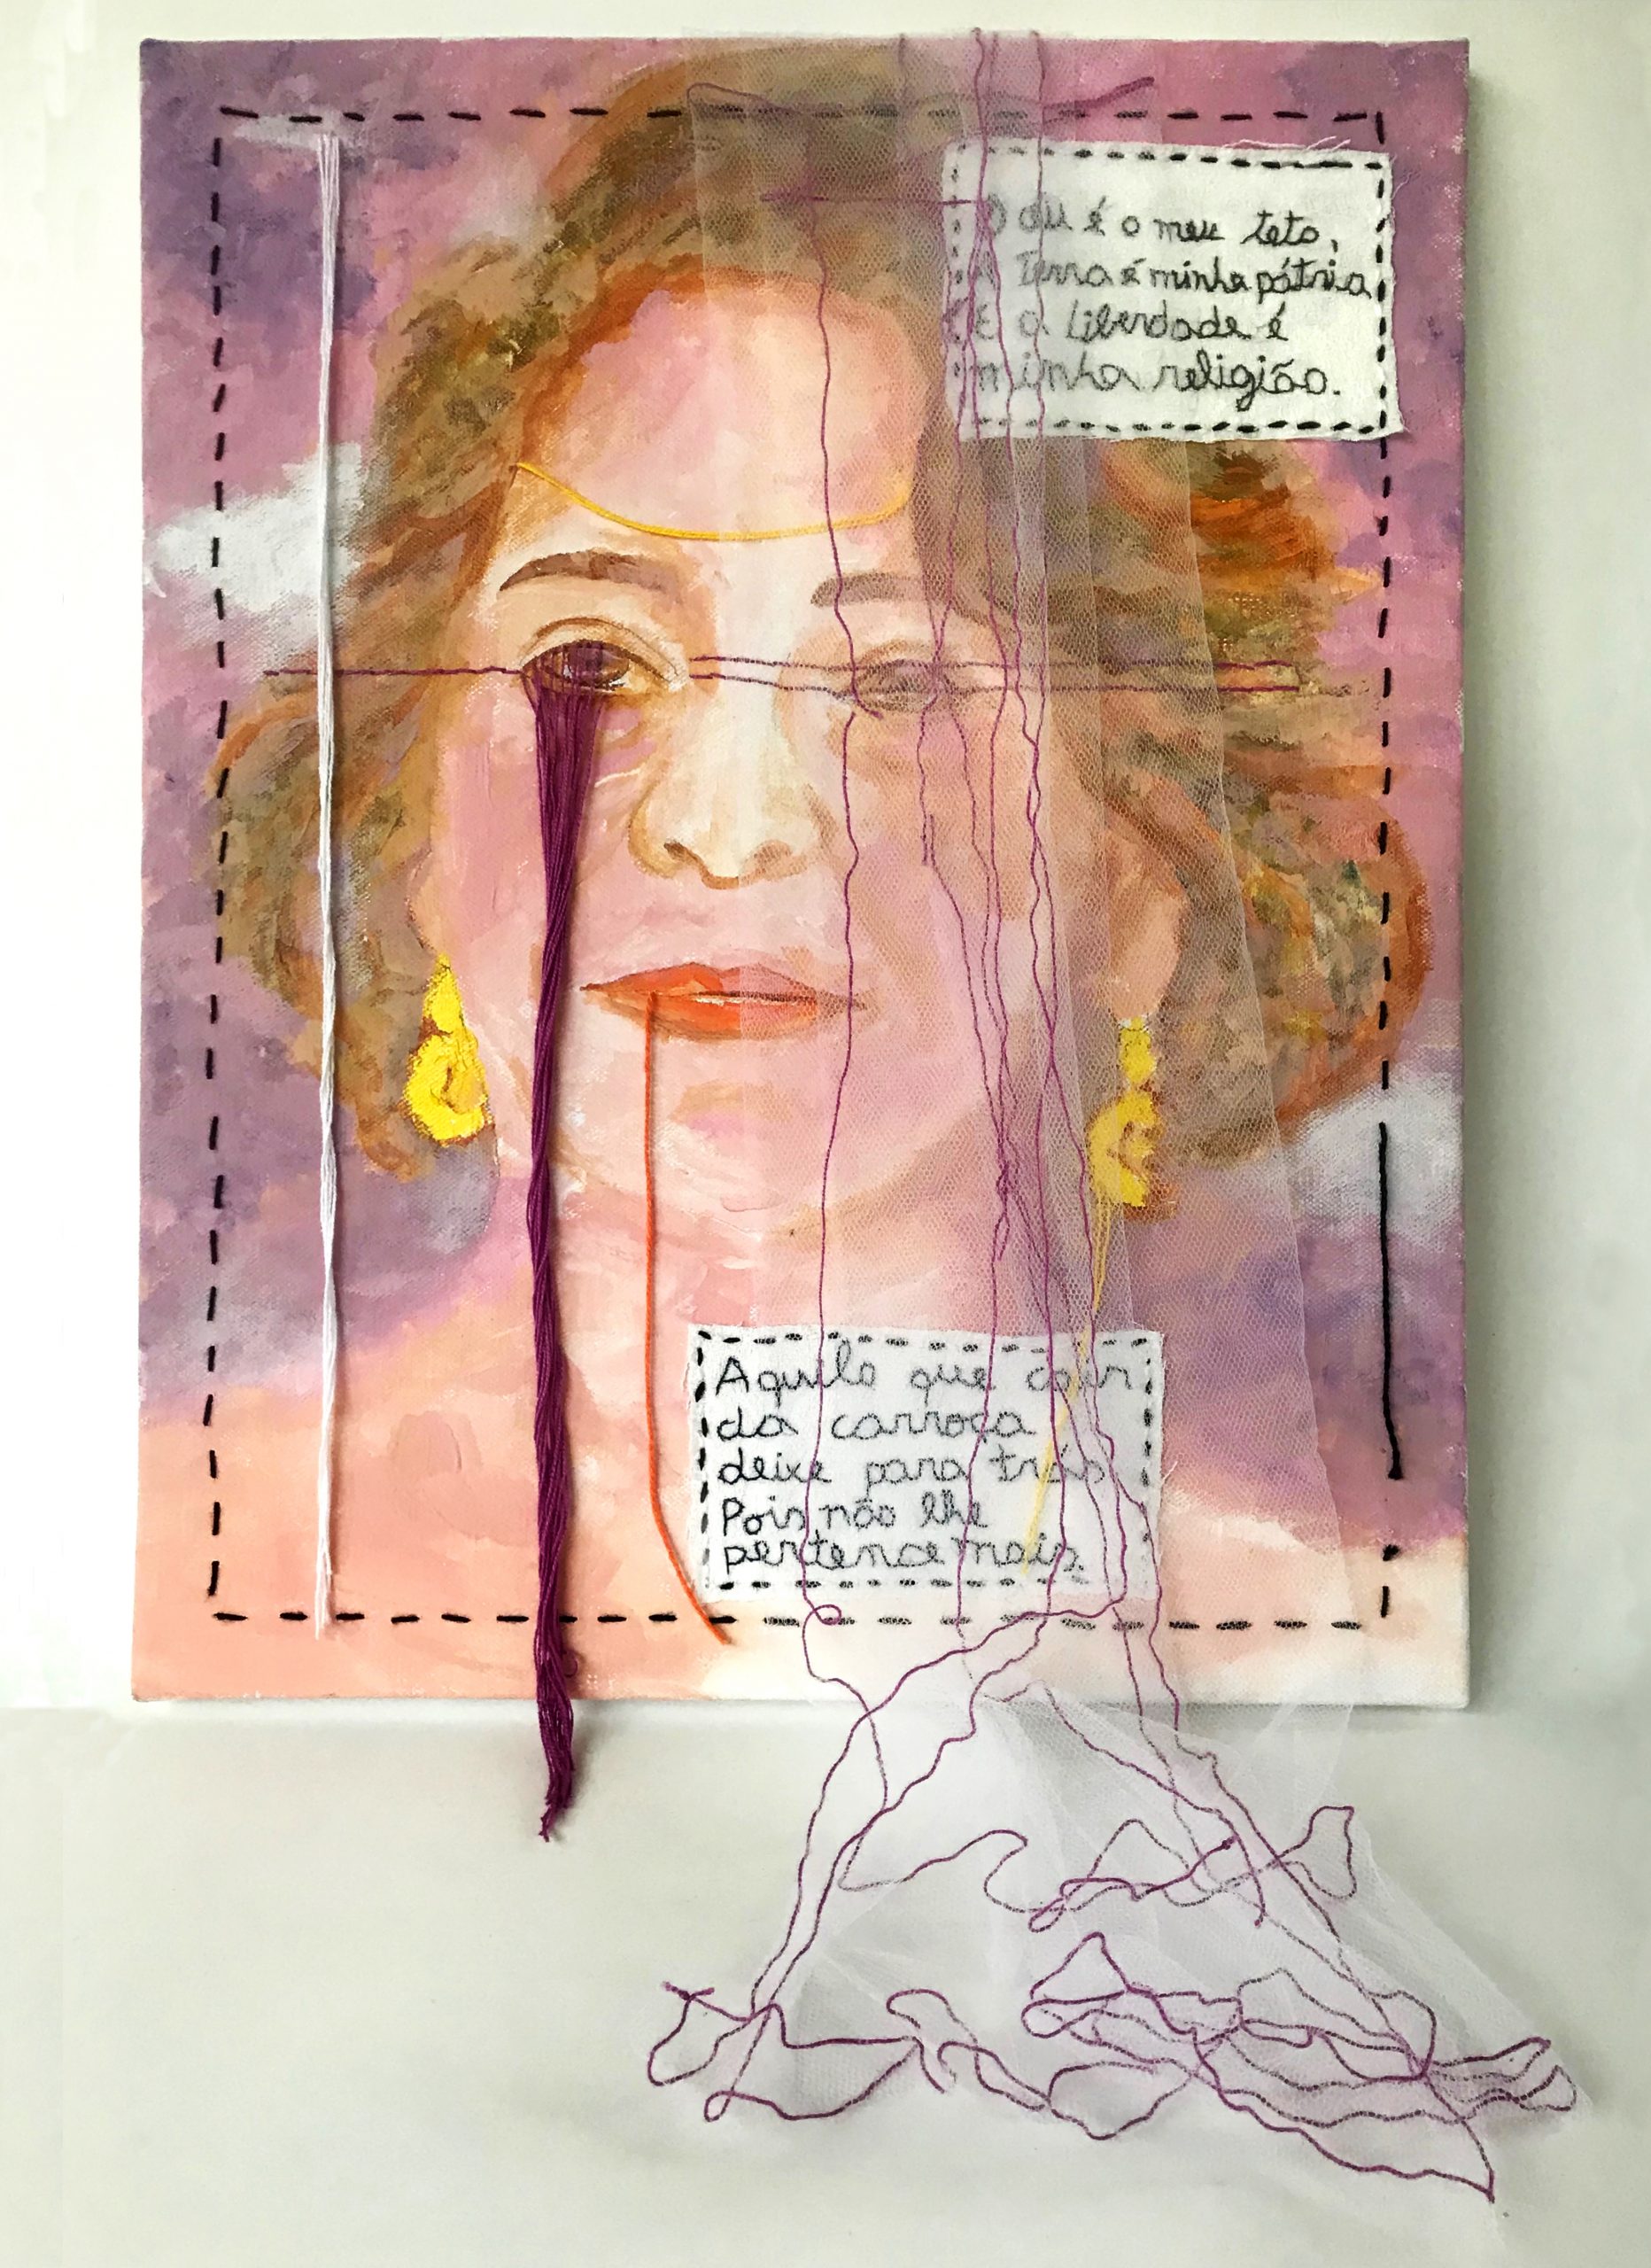 Katia Politzer
Almost Face, 2020.
Canvas, acrylic paint, cotton fabric, tule, embroidery
20 x 16 inches; 50 x 40 cm